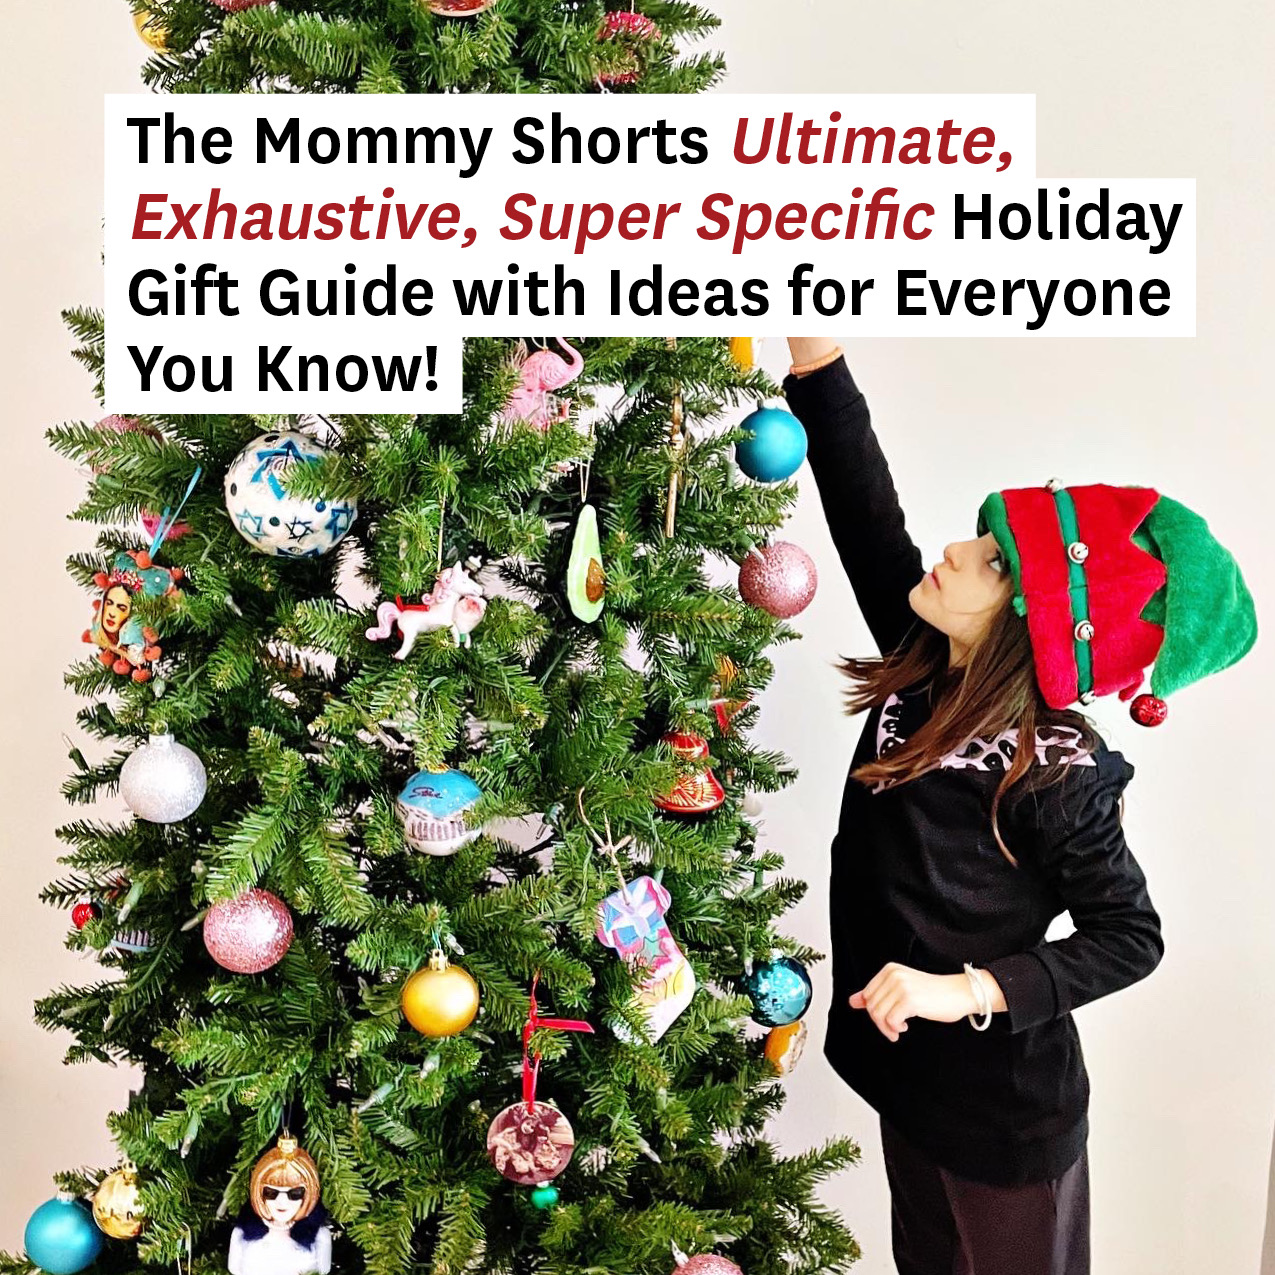 42 Best Christmas Gift Ideas for Mom That Will Make You The Favorite Child  - By Sophia Lee